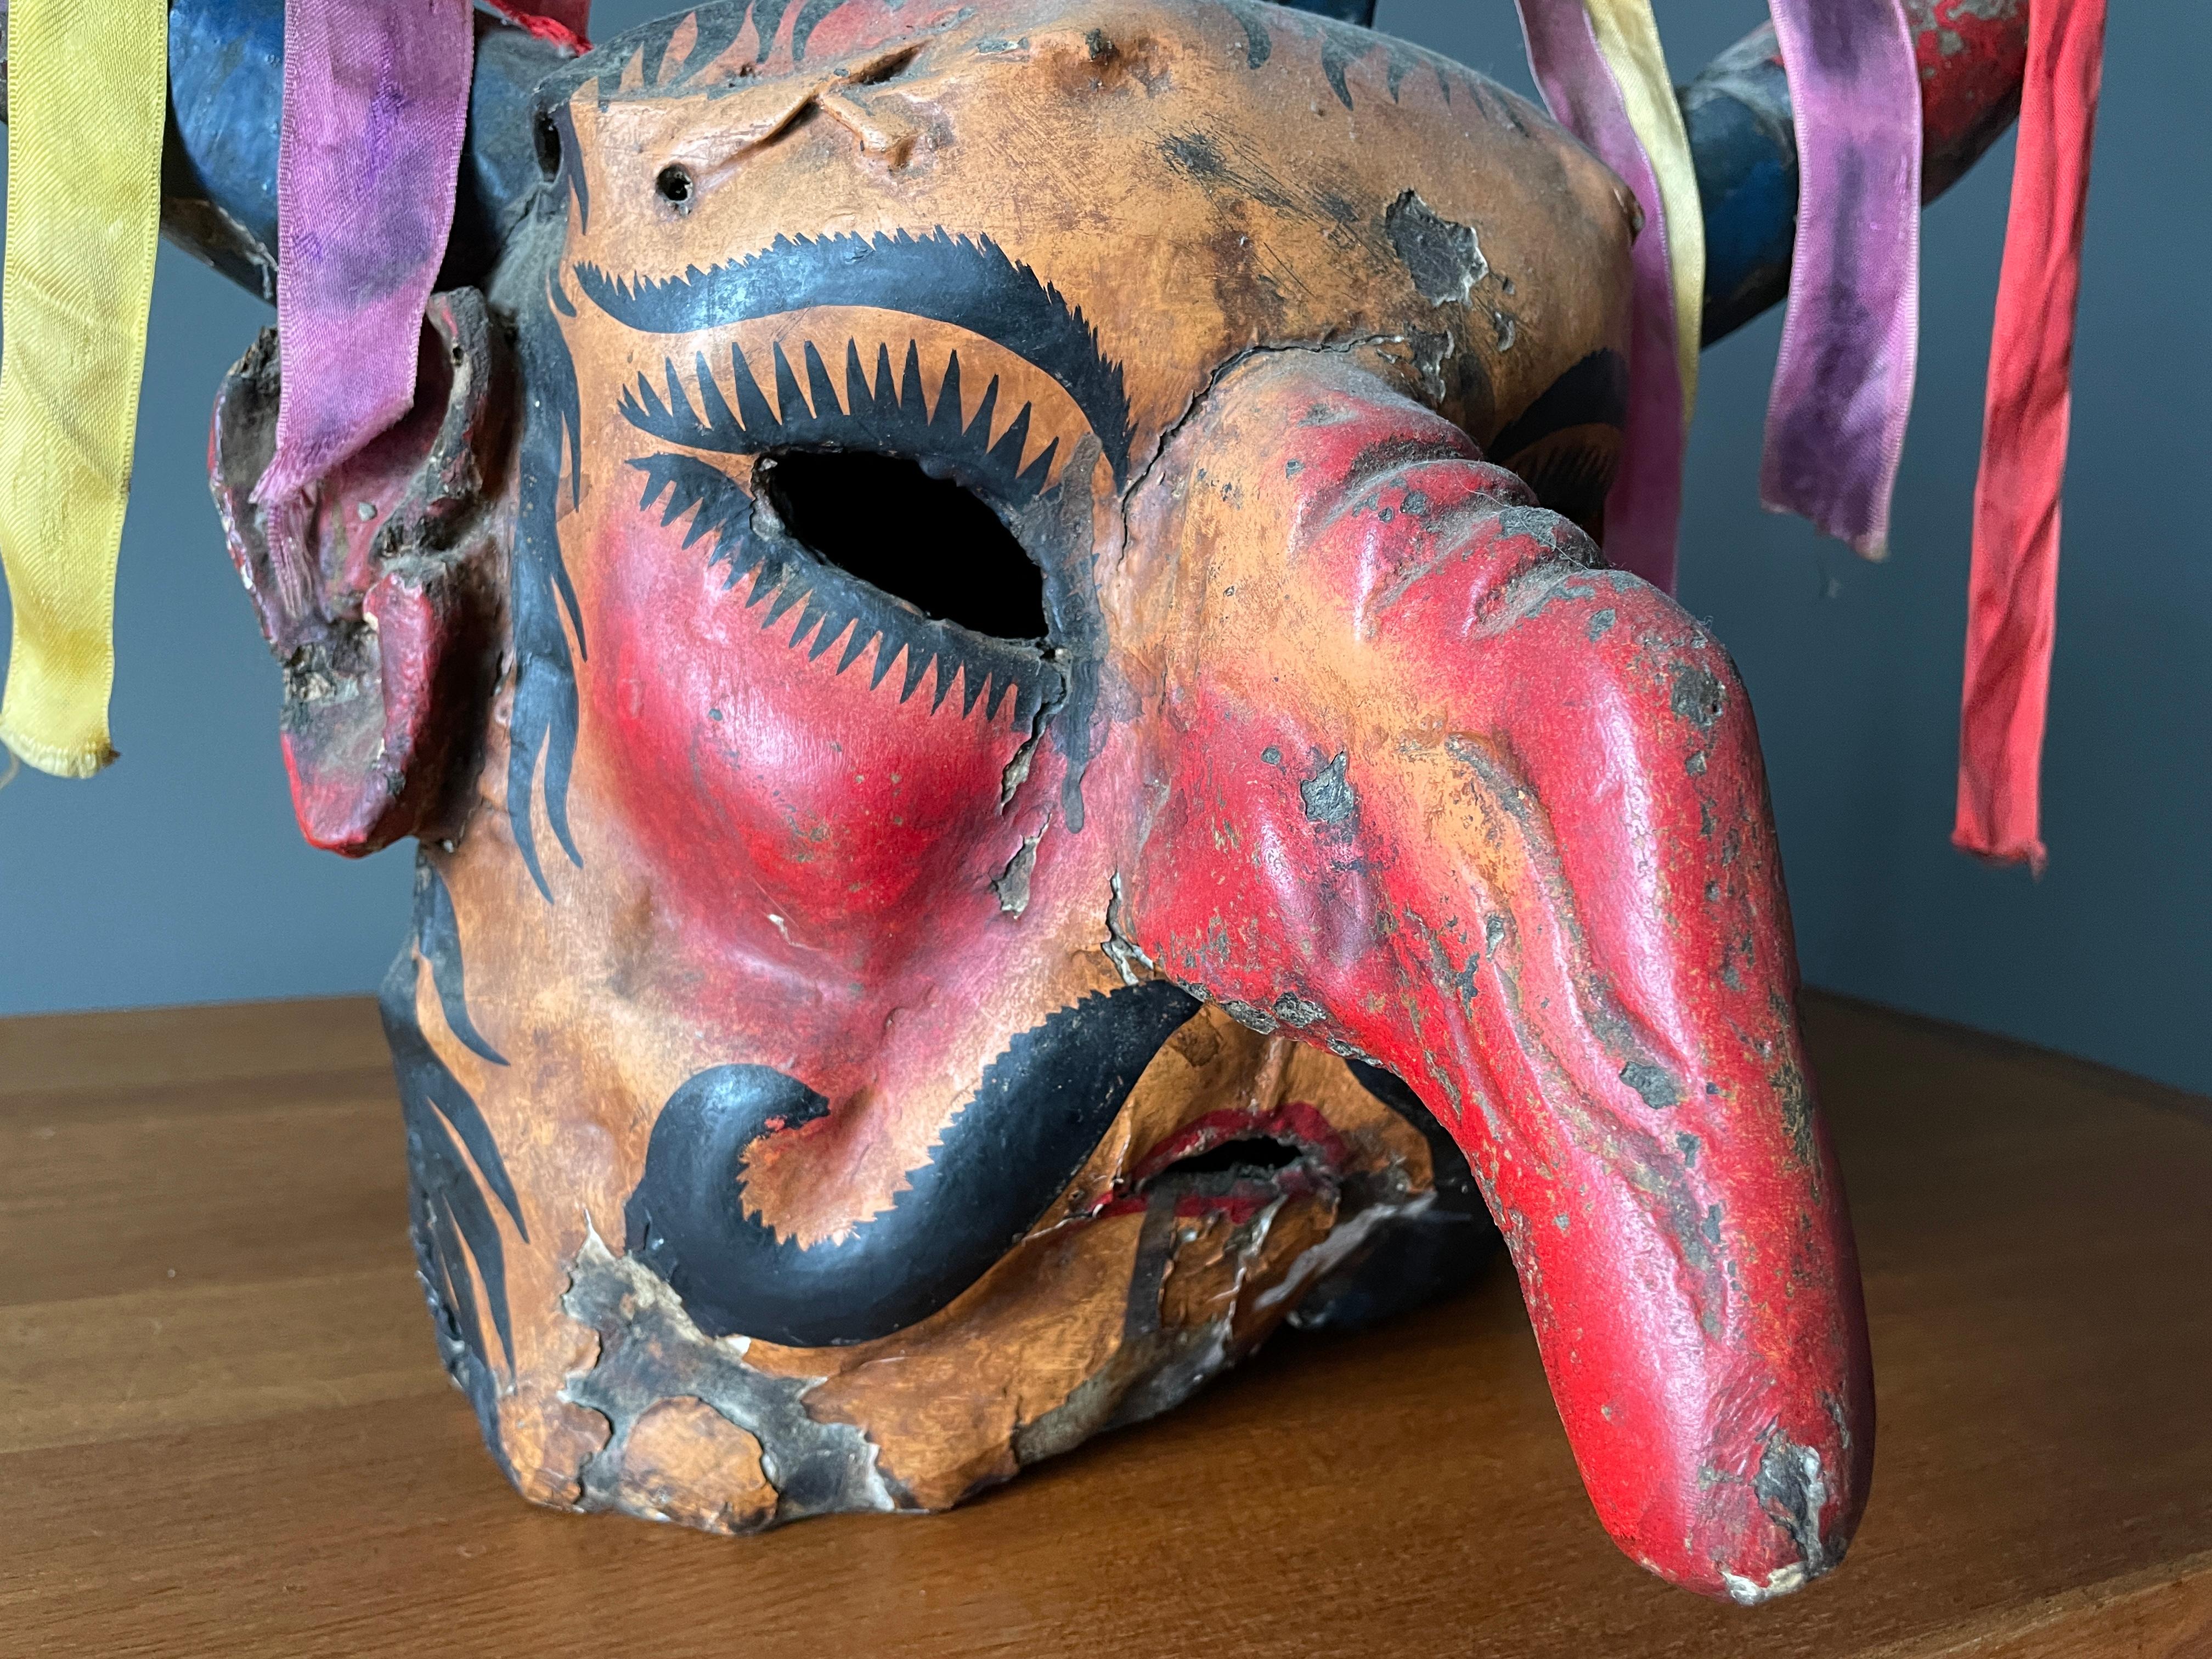 Vintage ceremonial Mexican style plaster mask. A beautiful piece of folk art. Would look great in any room.